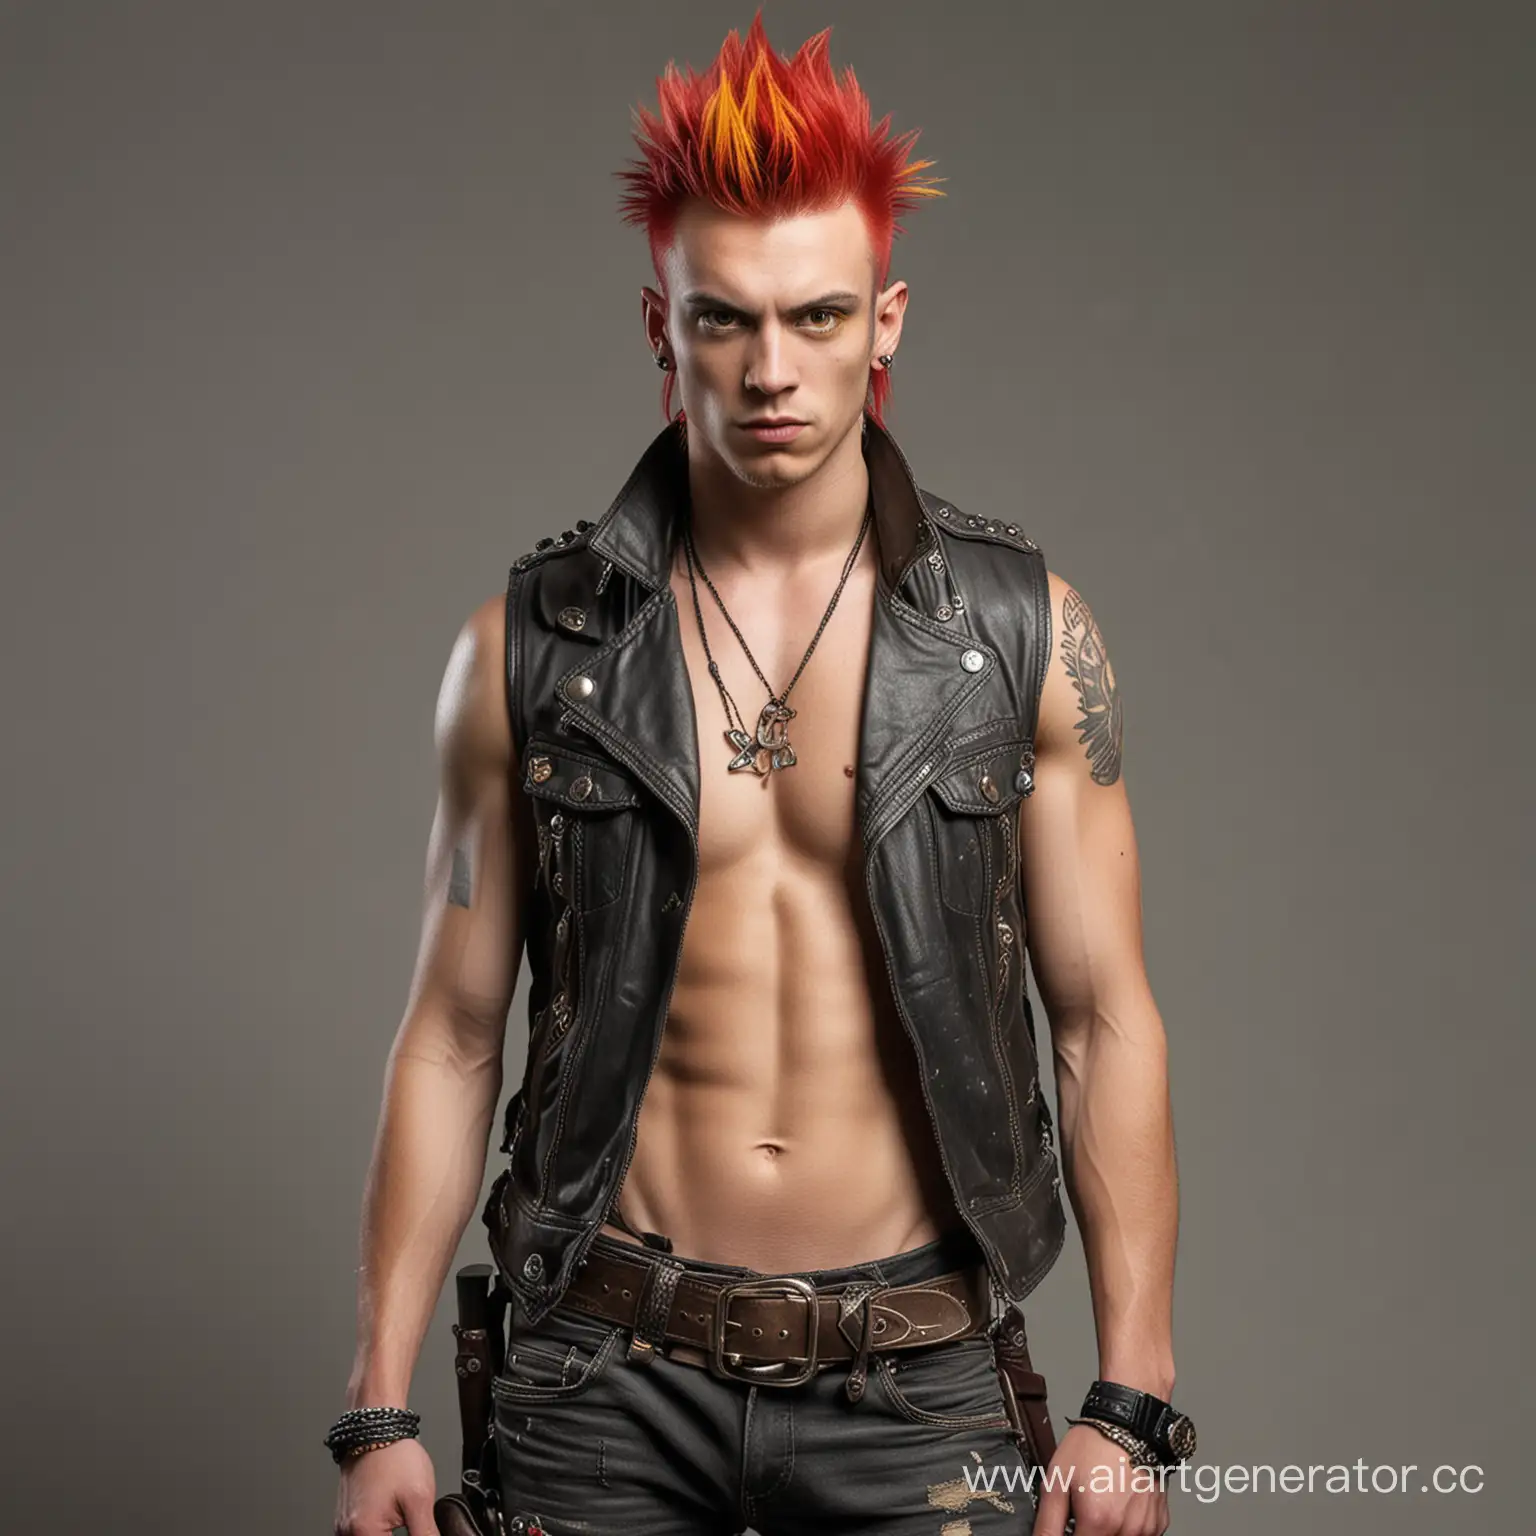 A young guy, a rocker, with a guitar on his back and a pistol in his hands, he has a long, red mohawk and yellow, bright eyes. Dressed in a vest with a bare torso and combat boots.